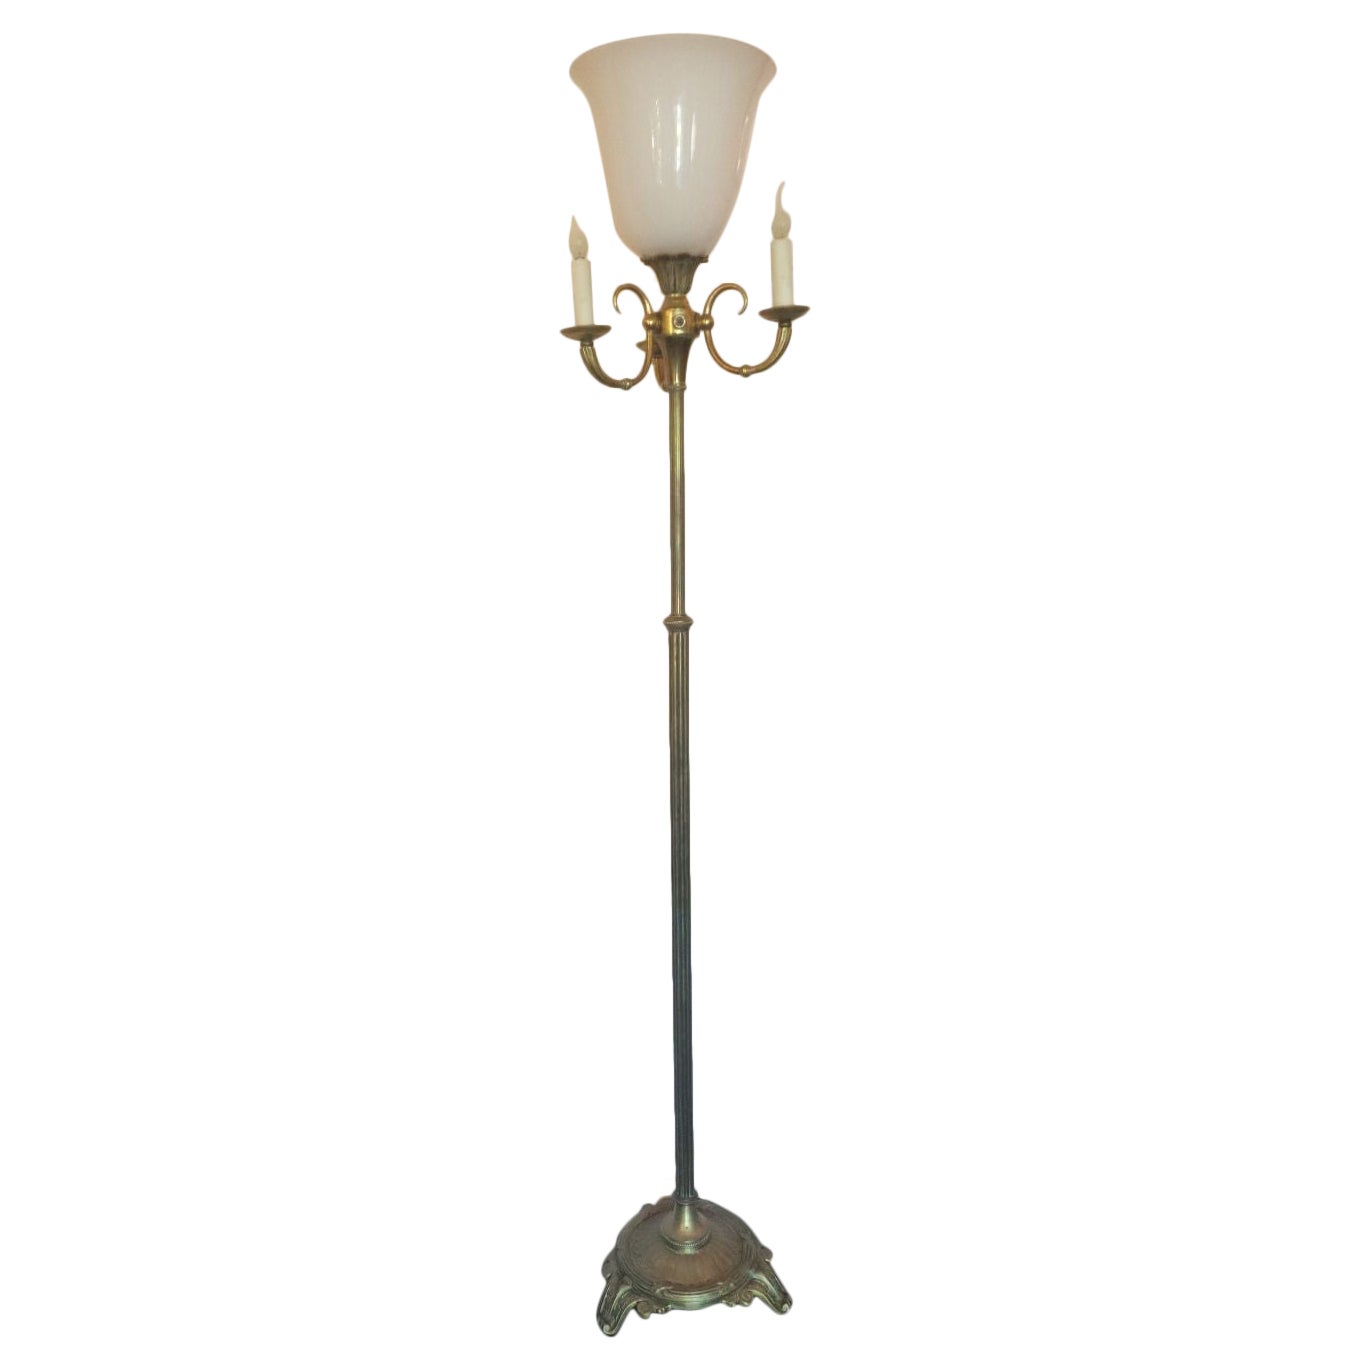 French Brass Four-Light Torchiere Floor Lamp